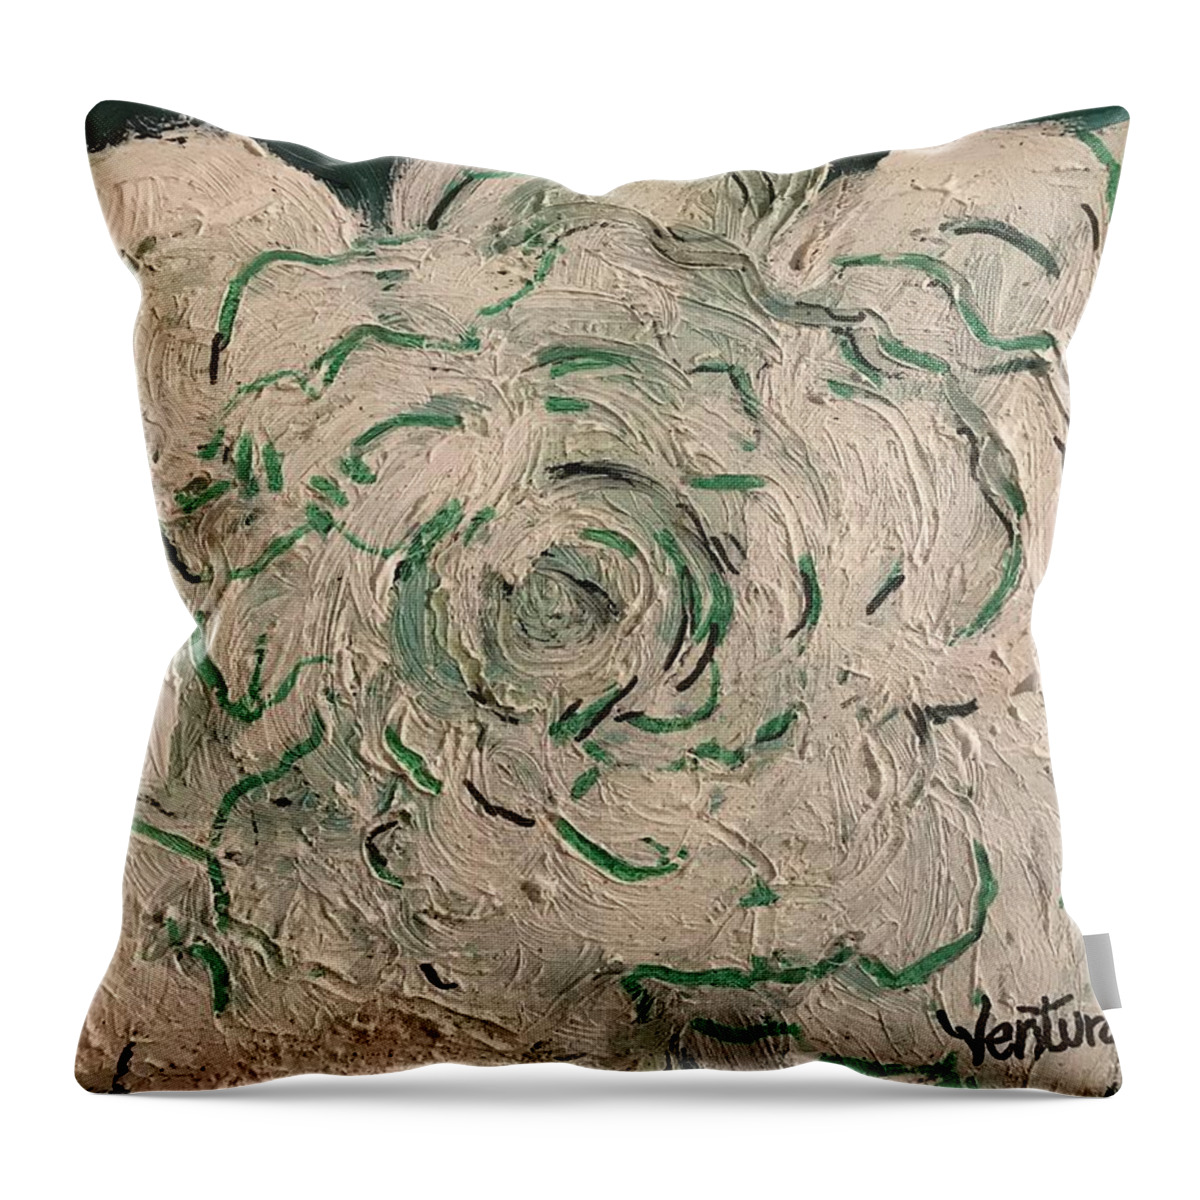 Heart Of The Matter Throw Pillow featuring the painting The heart of the matter by Clare Ventura